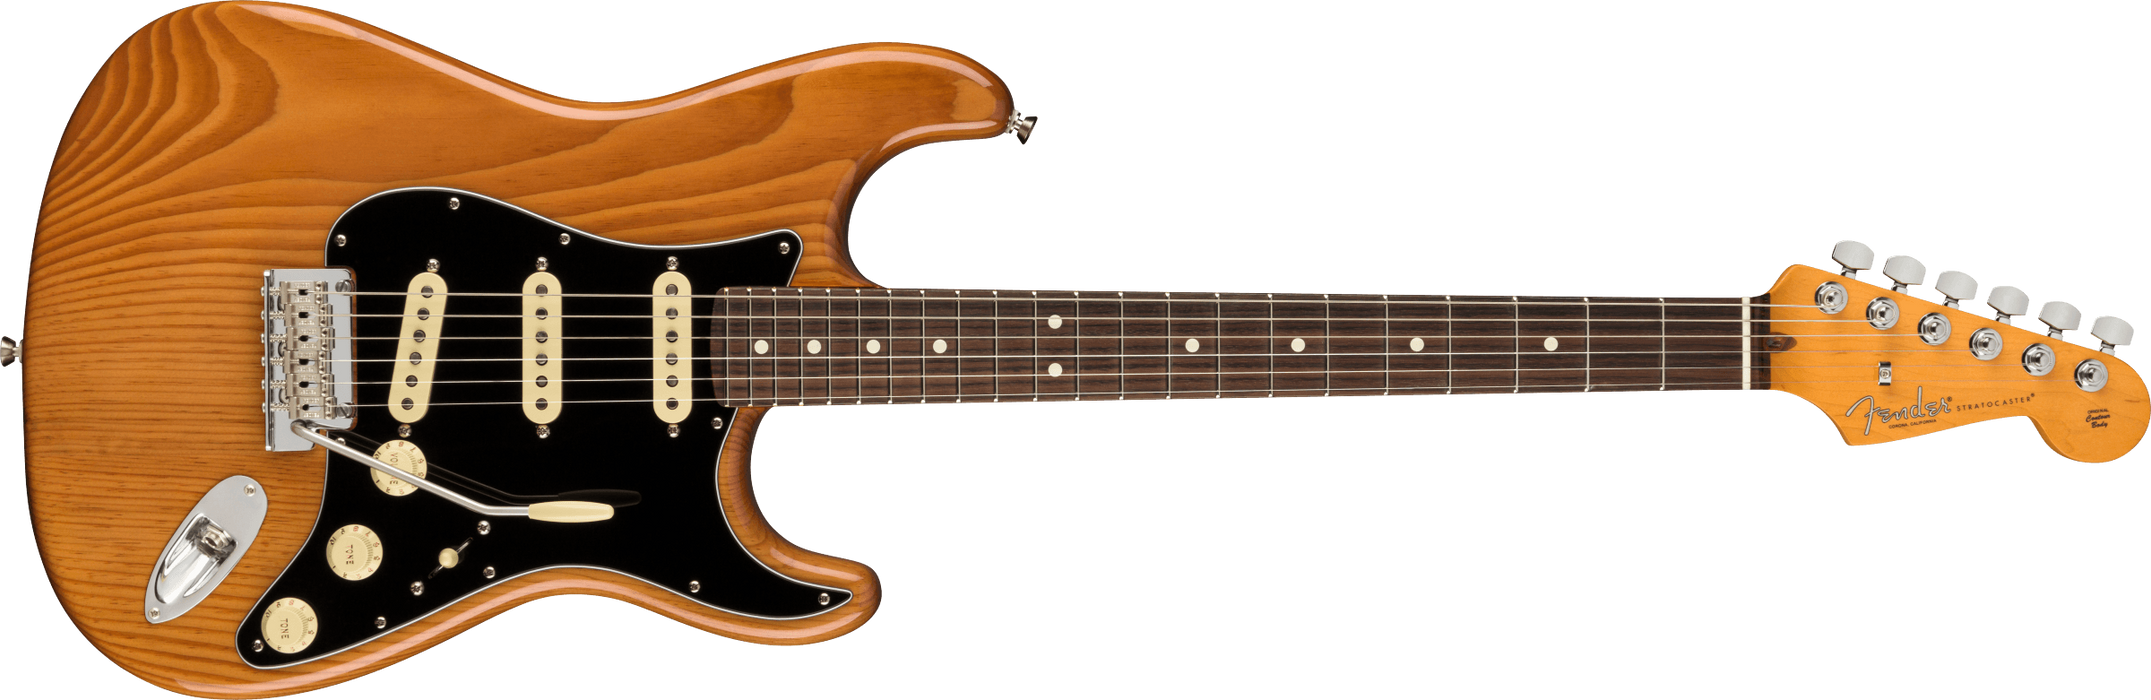 Fender American Professional II Stratocaster Rosewood Fingerboard - Roasted Pine